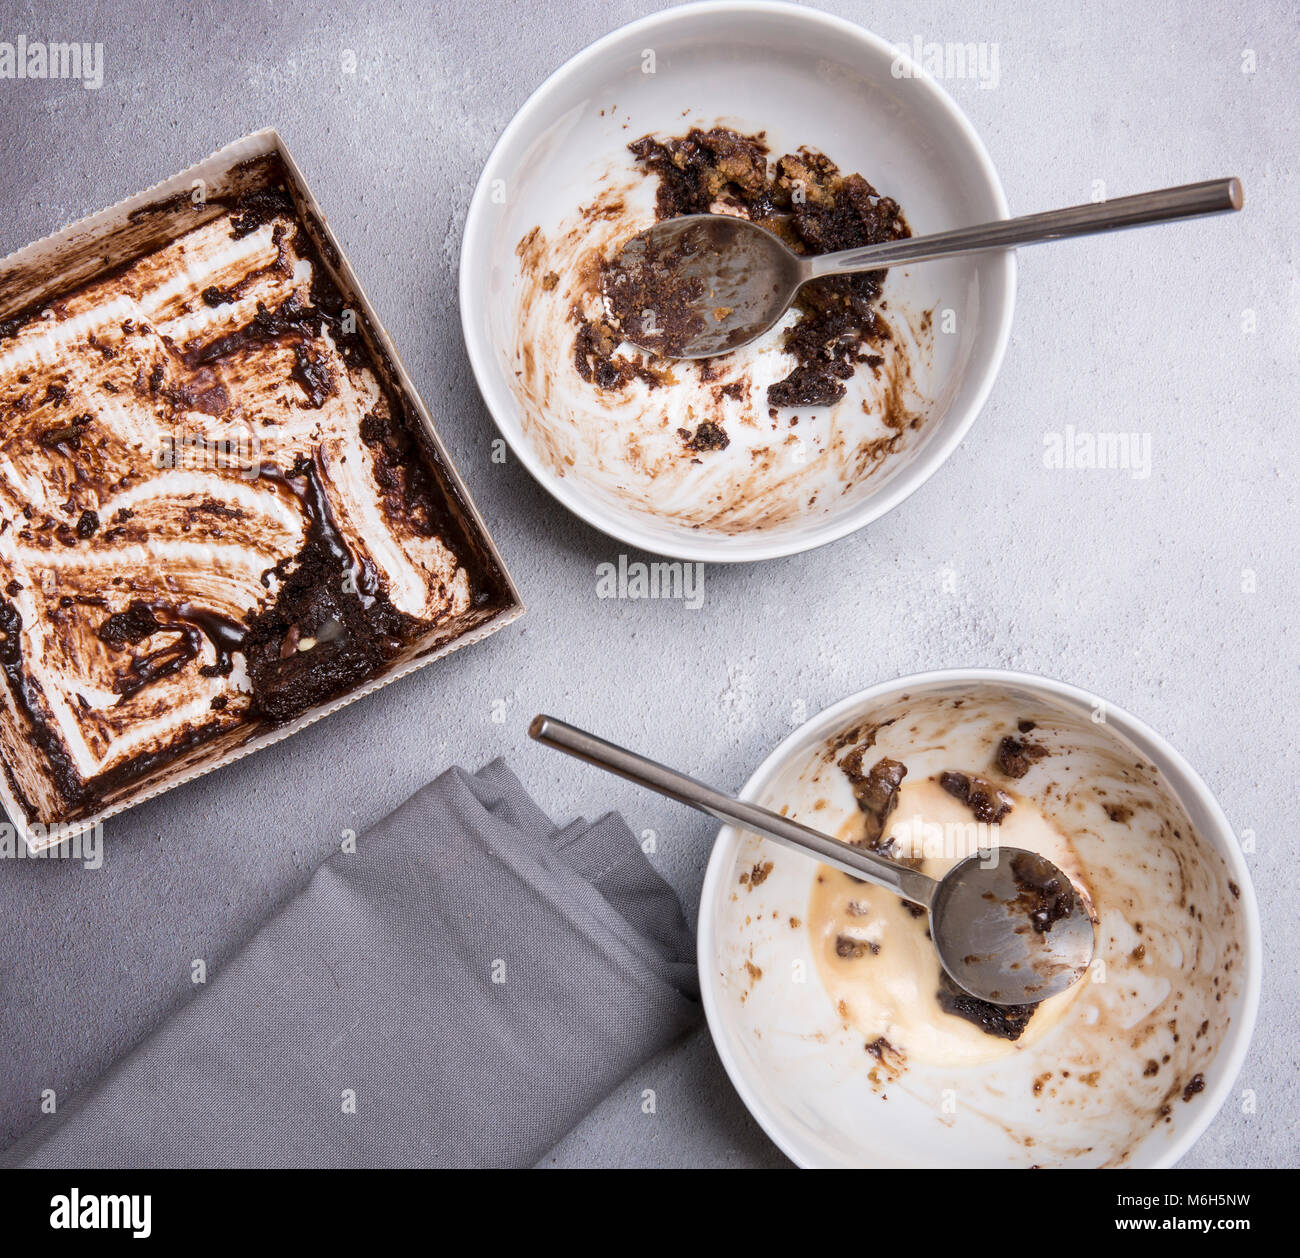 Chocolate pudding leftovers on a grey textured background with mapkin spoons and bowls Stock Photo